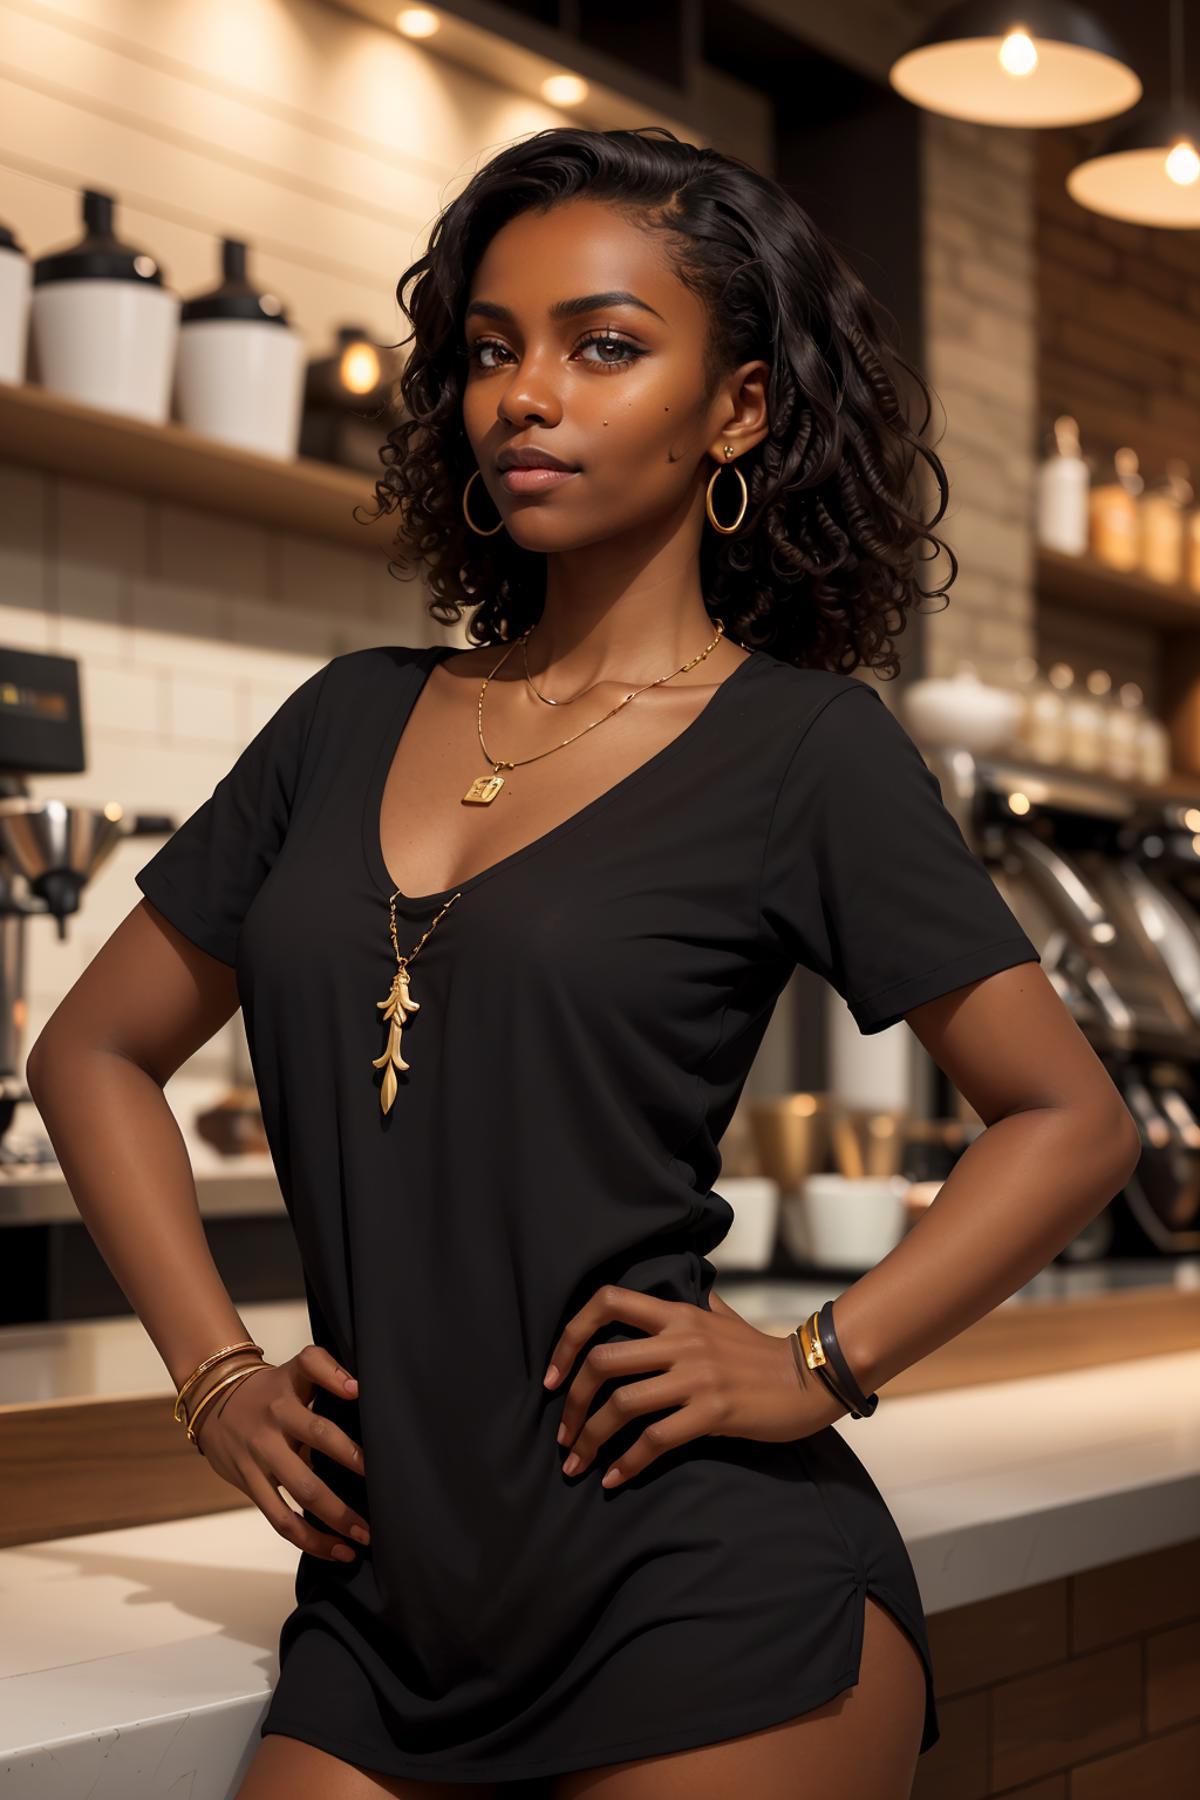 A woman wearing a black shirt and gold hoop earrings poses in a kitchen.